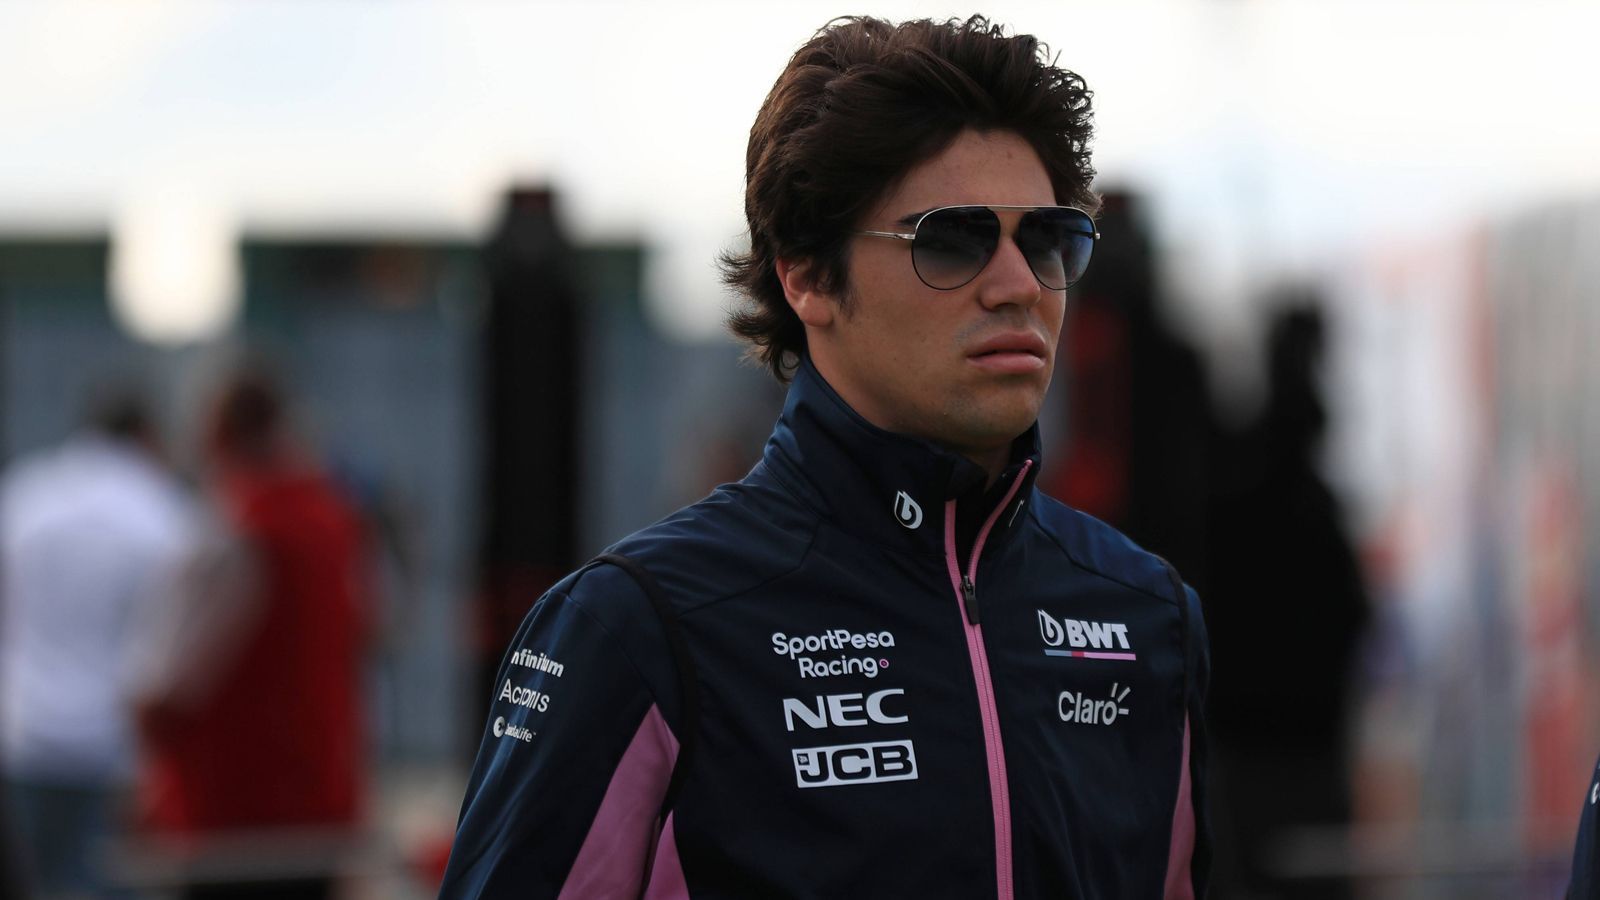 
                <strong>10. Lance Stroll</strong><br>
                Punkte insgesamt: 12Aktuelle Punkte: 7Punkte 2014: /Punkte 2015: /Punkte 2016: /Punkte 2017: 1Punkte 2018: 7Punkte 2019: 3
              